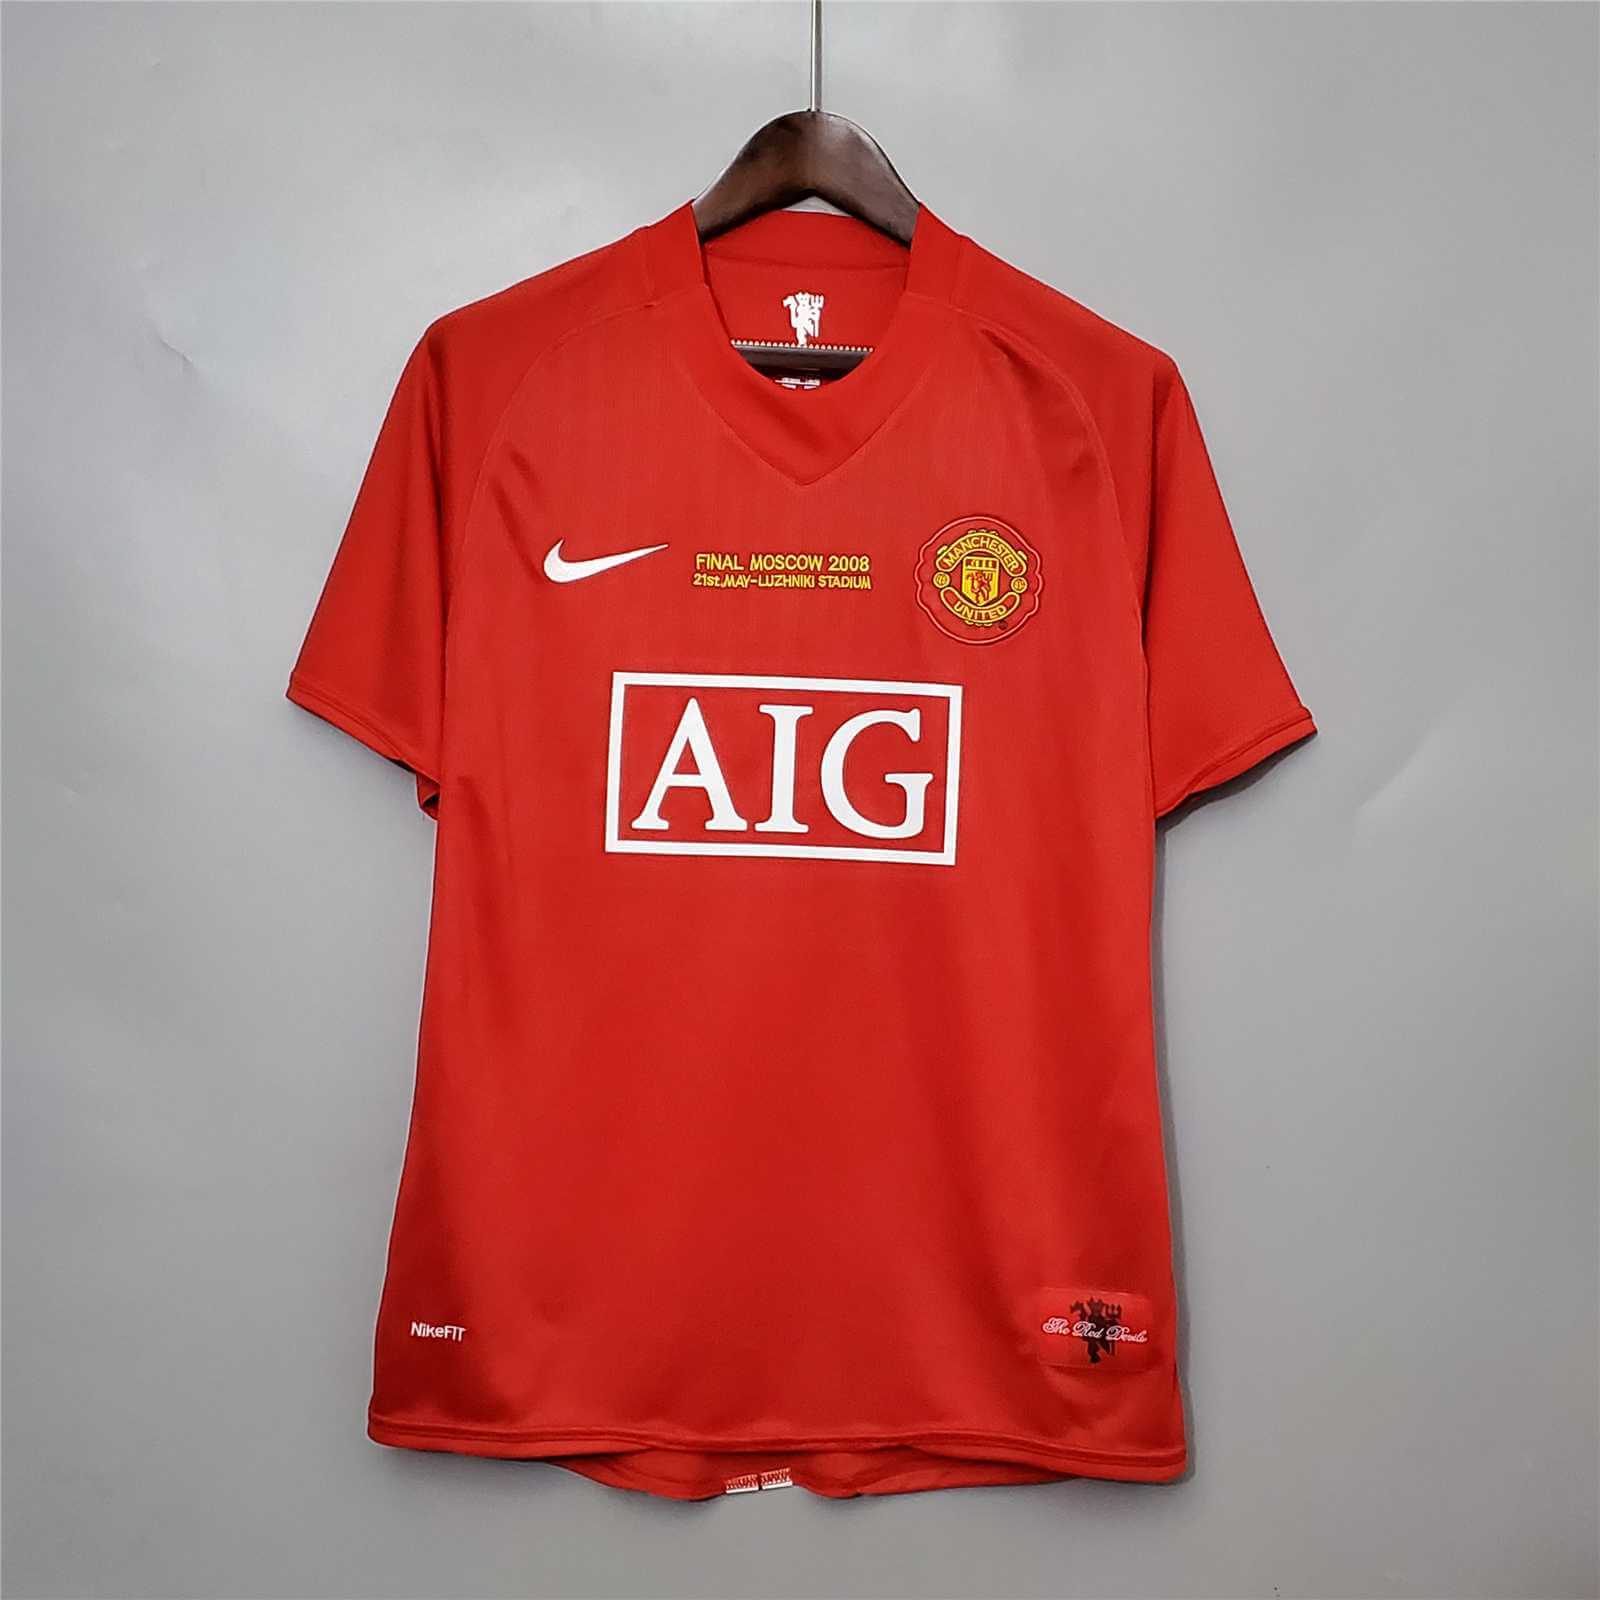 Manchester United 2007-2008 Home Kit – The Football Heritage